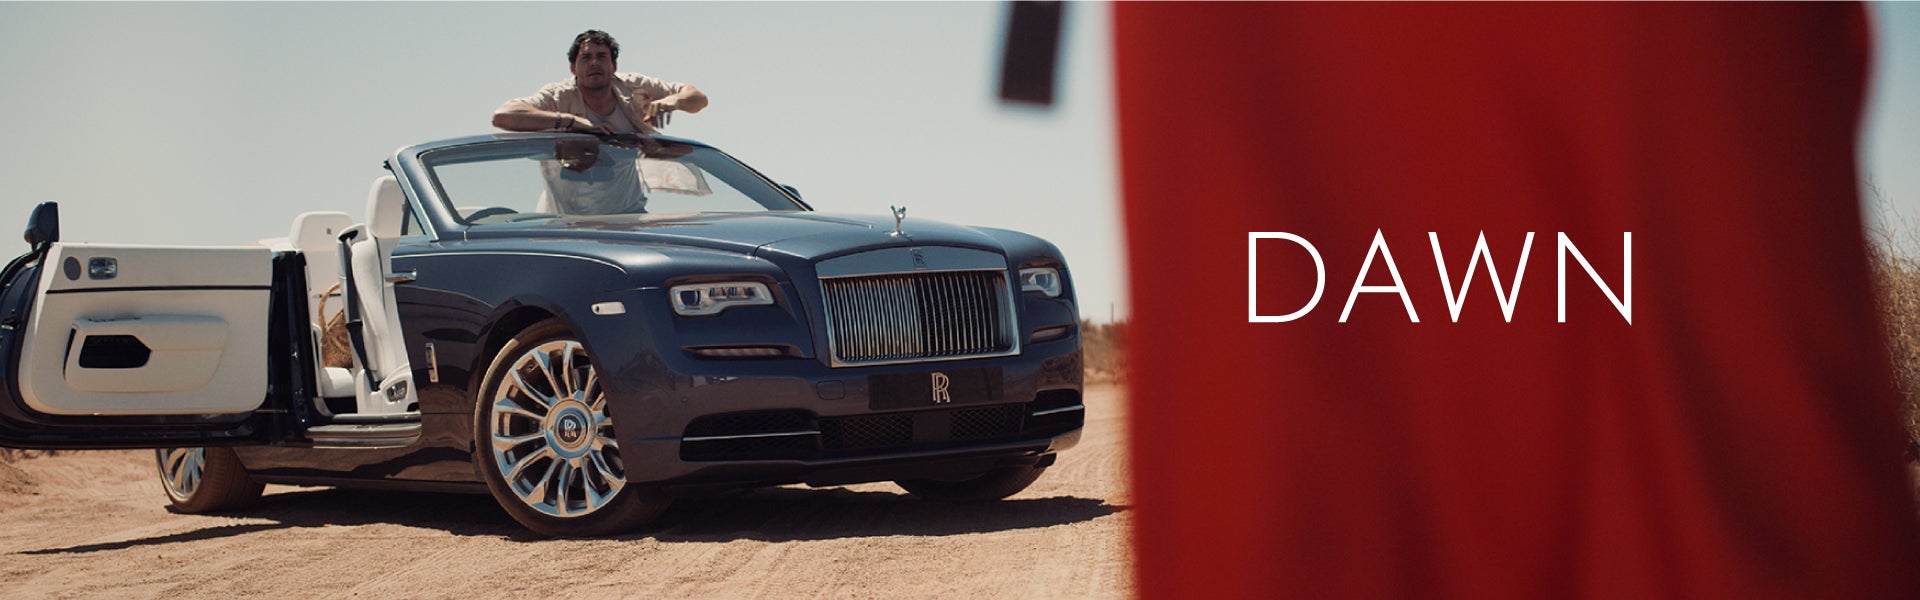 Wraith and Dawn Dropped From US RollsRoyce Lineup After 2021